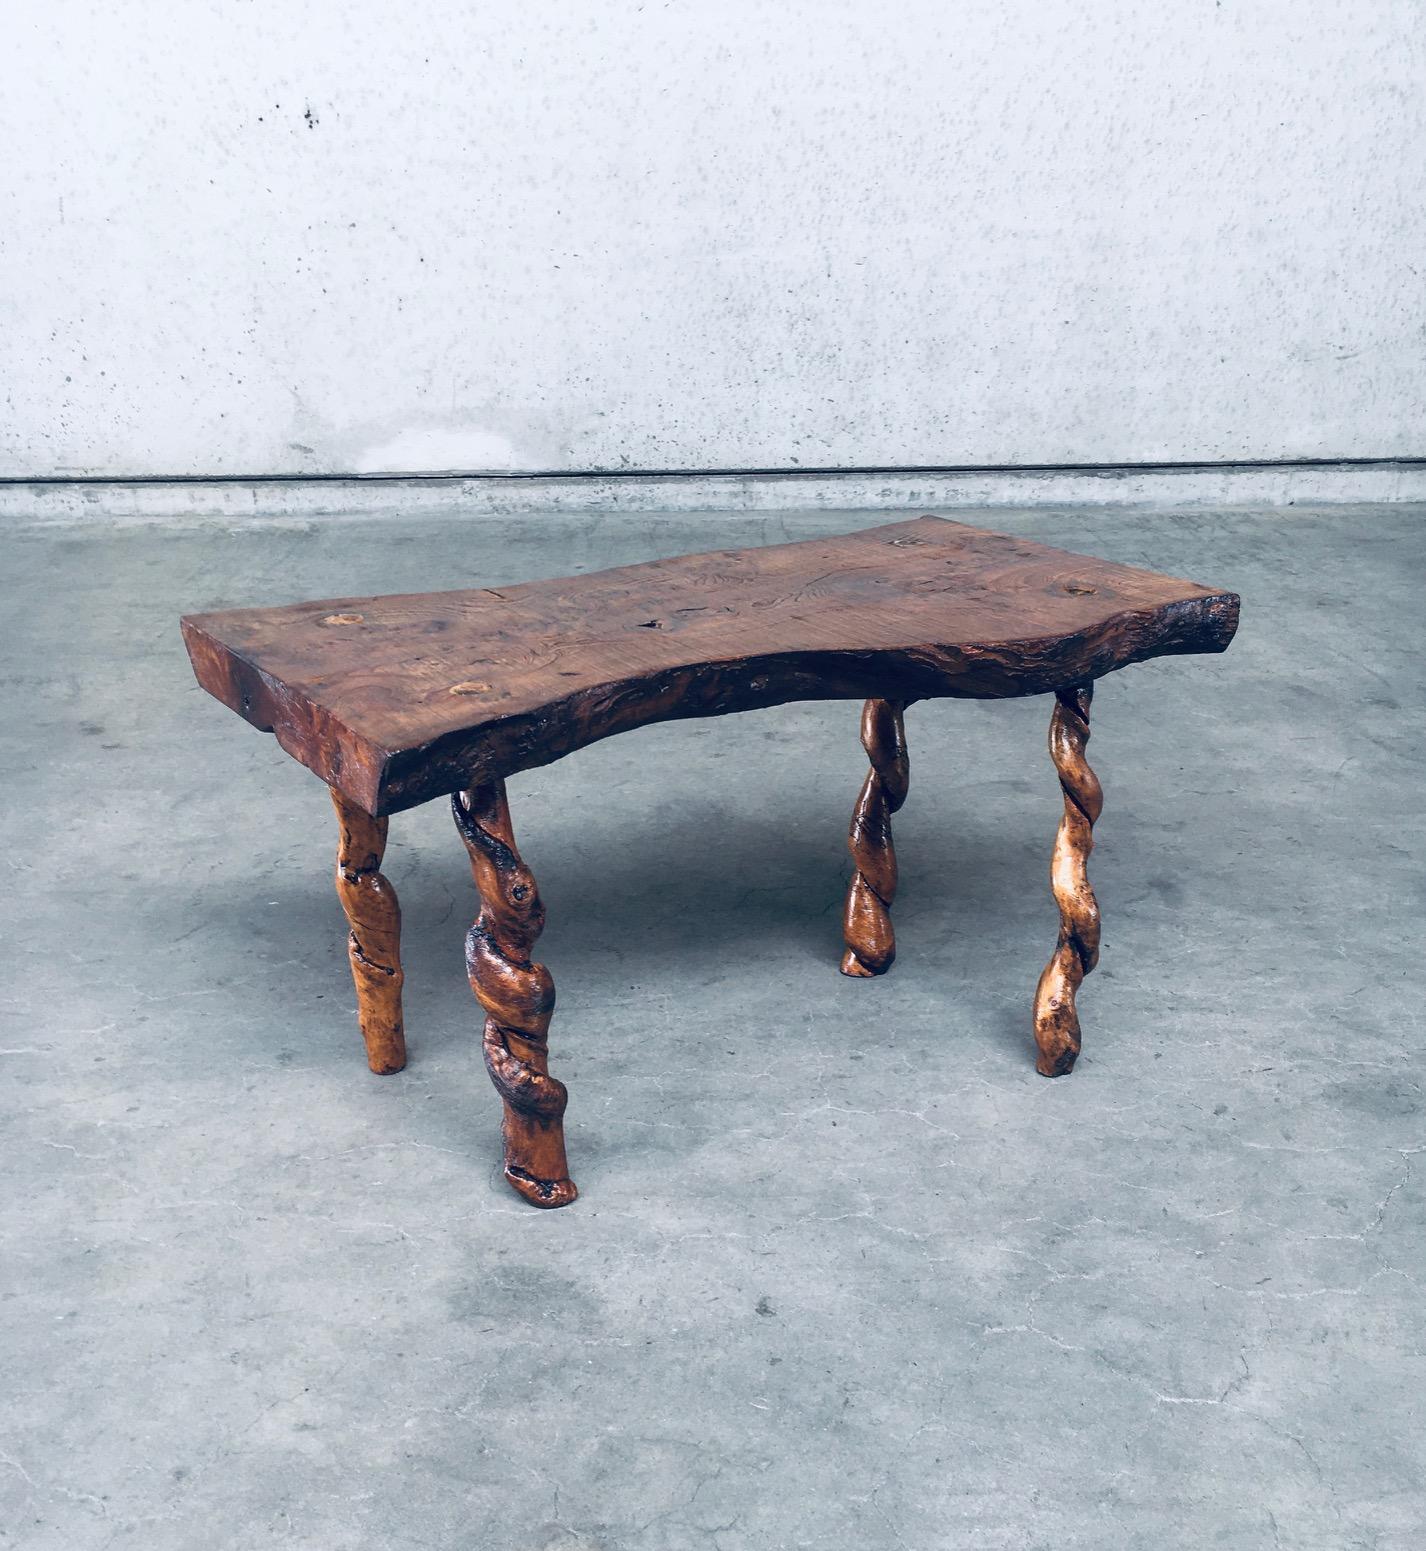 Vintage Brutalist Wabi Sabi style handcrafted side table. Hand made with a solid slab of oak wood with grape wood legs. Made in France in the 1940's / 50's. Crudely made. Has been restained and varnished. In very good solid condition. Measures 88cm